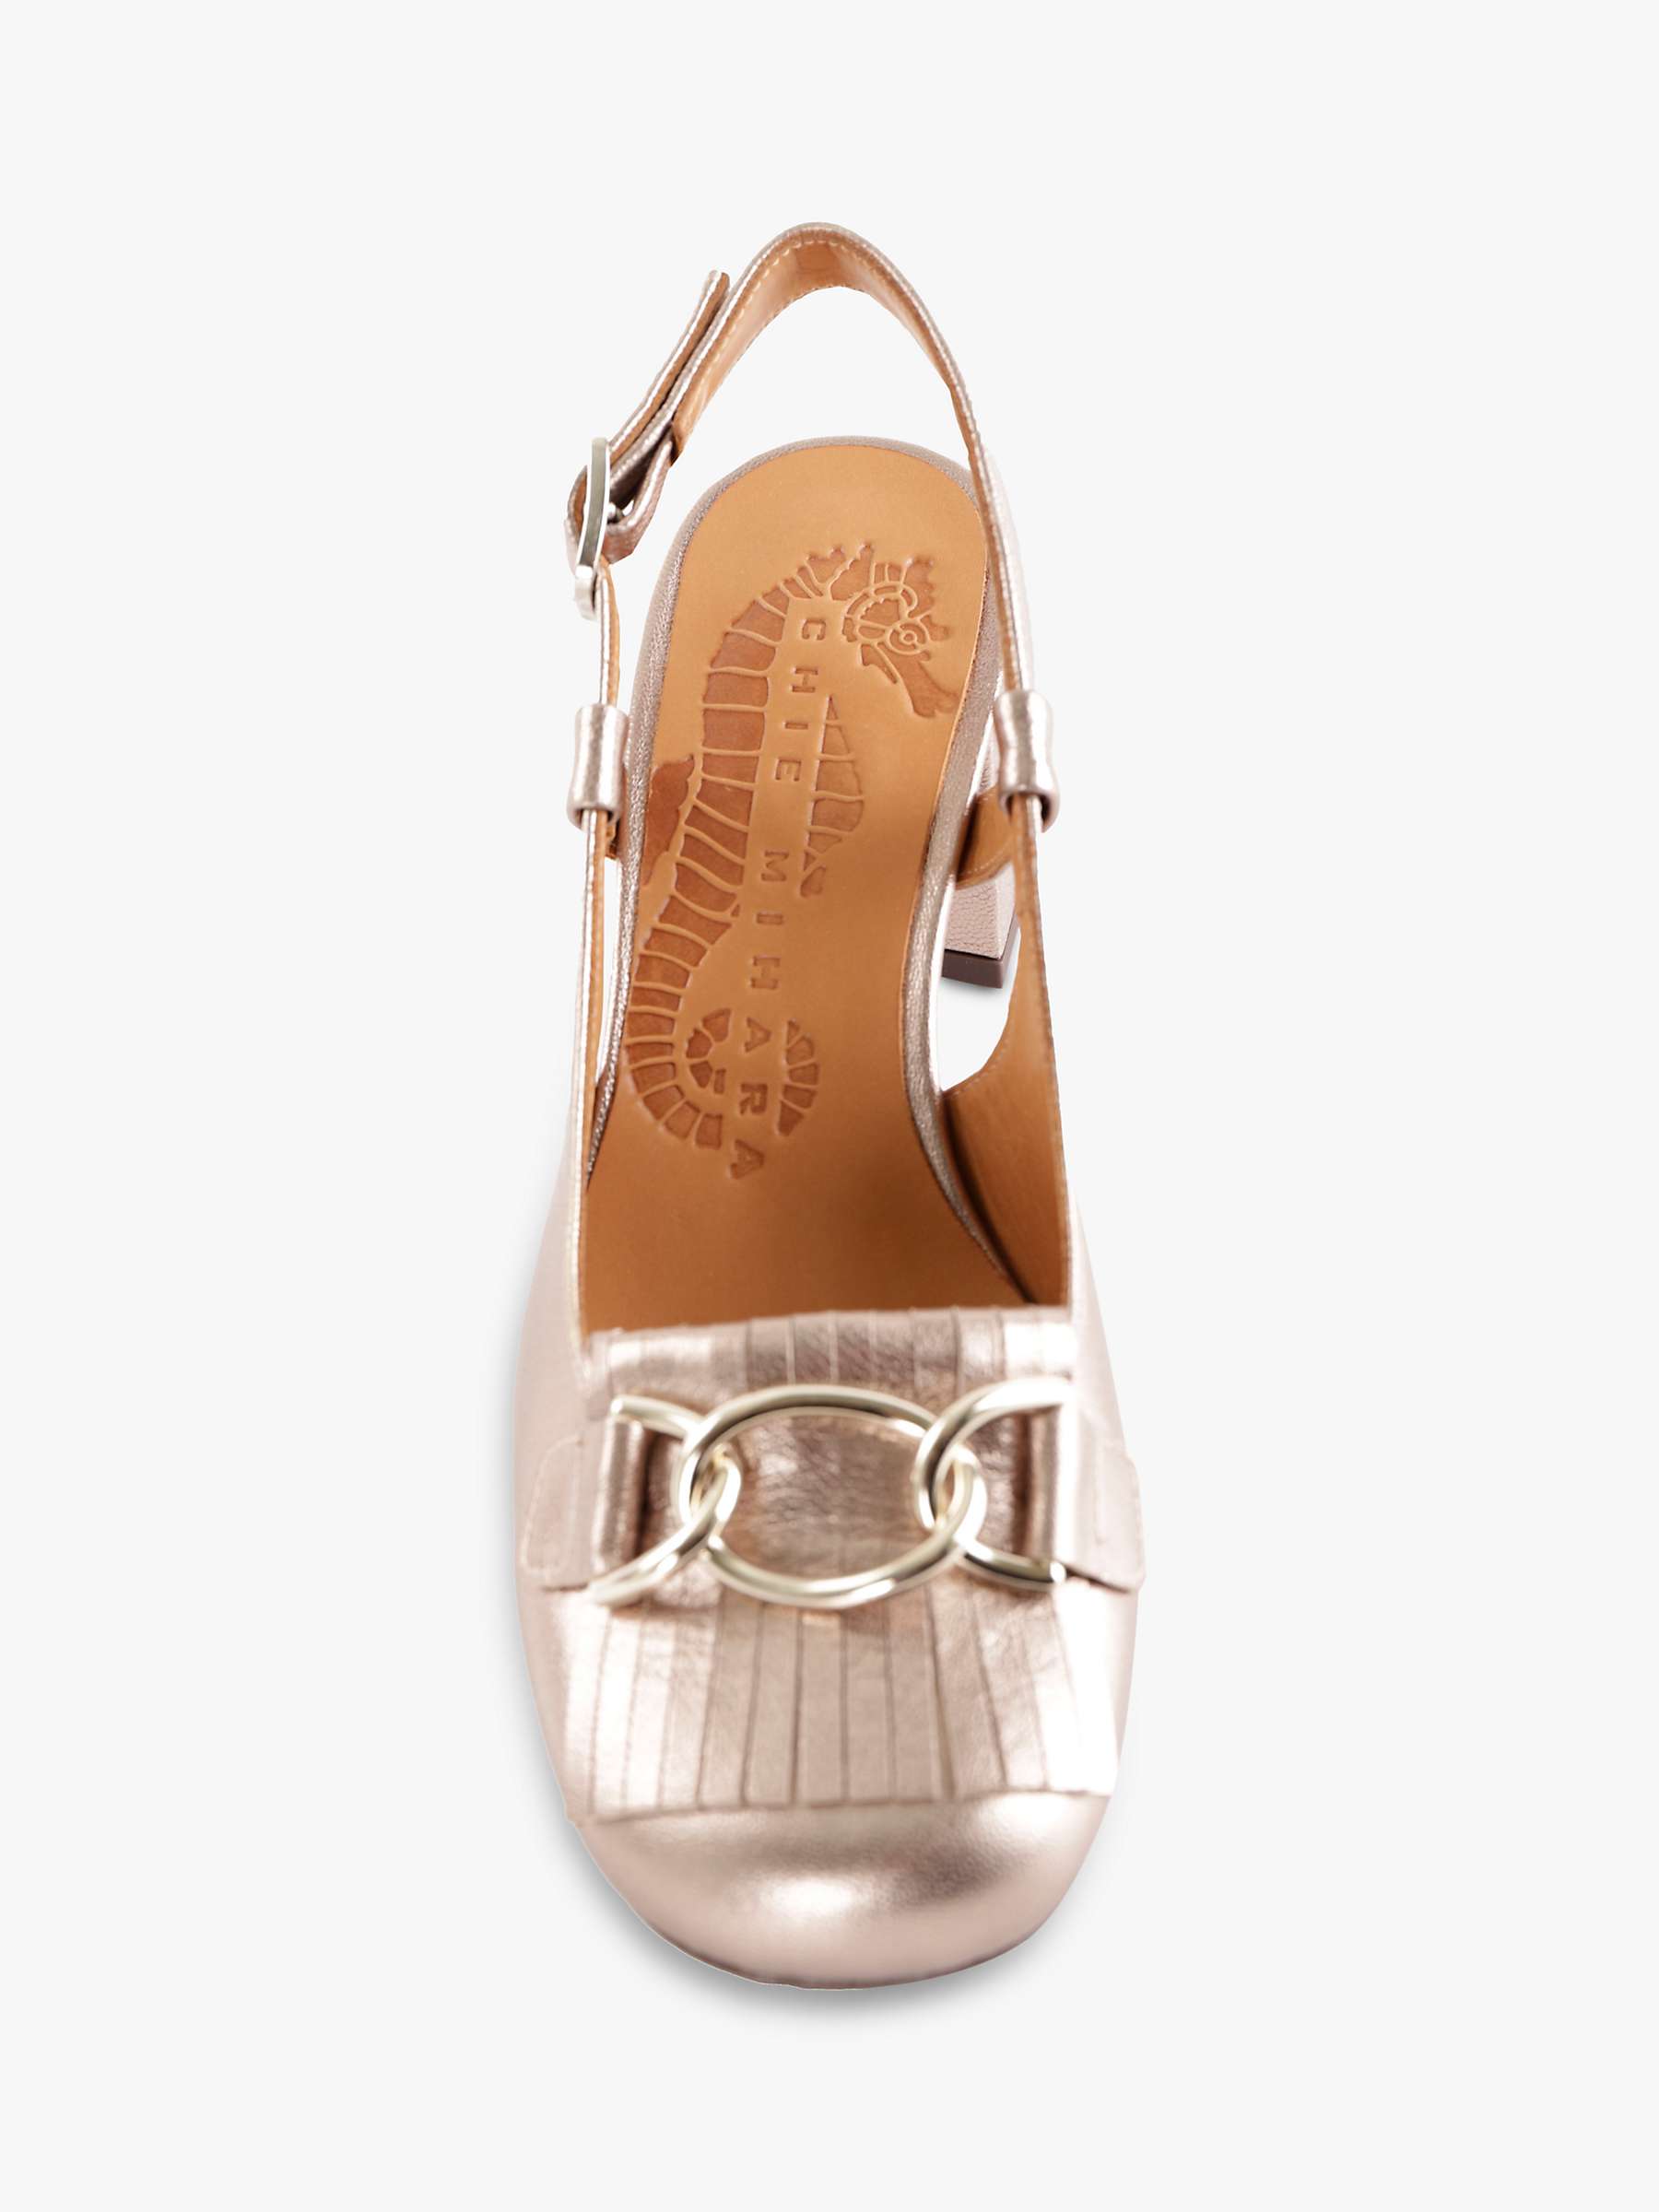 Buy Chie Mihara Mokumoku Leather Shoes, Iron Online at johnlewis.com